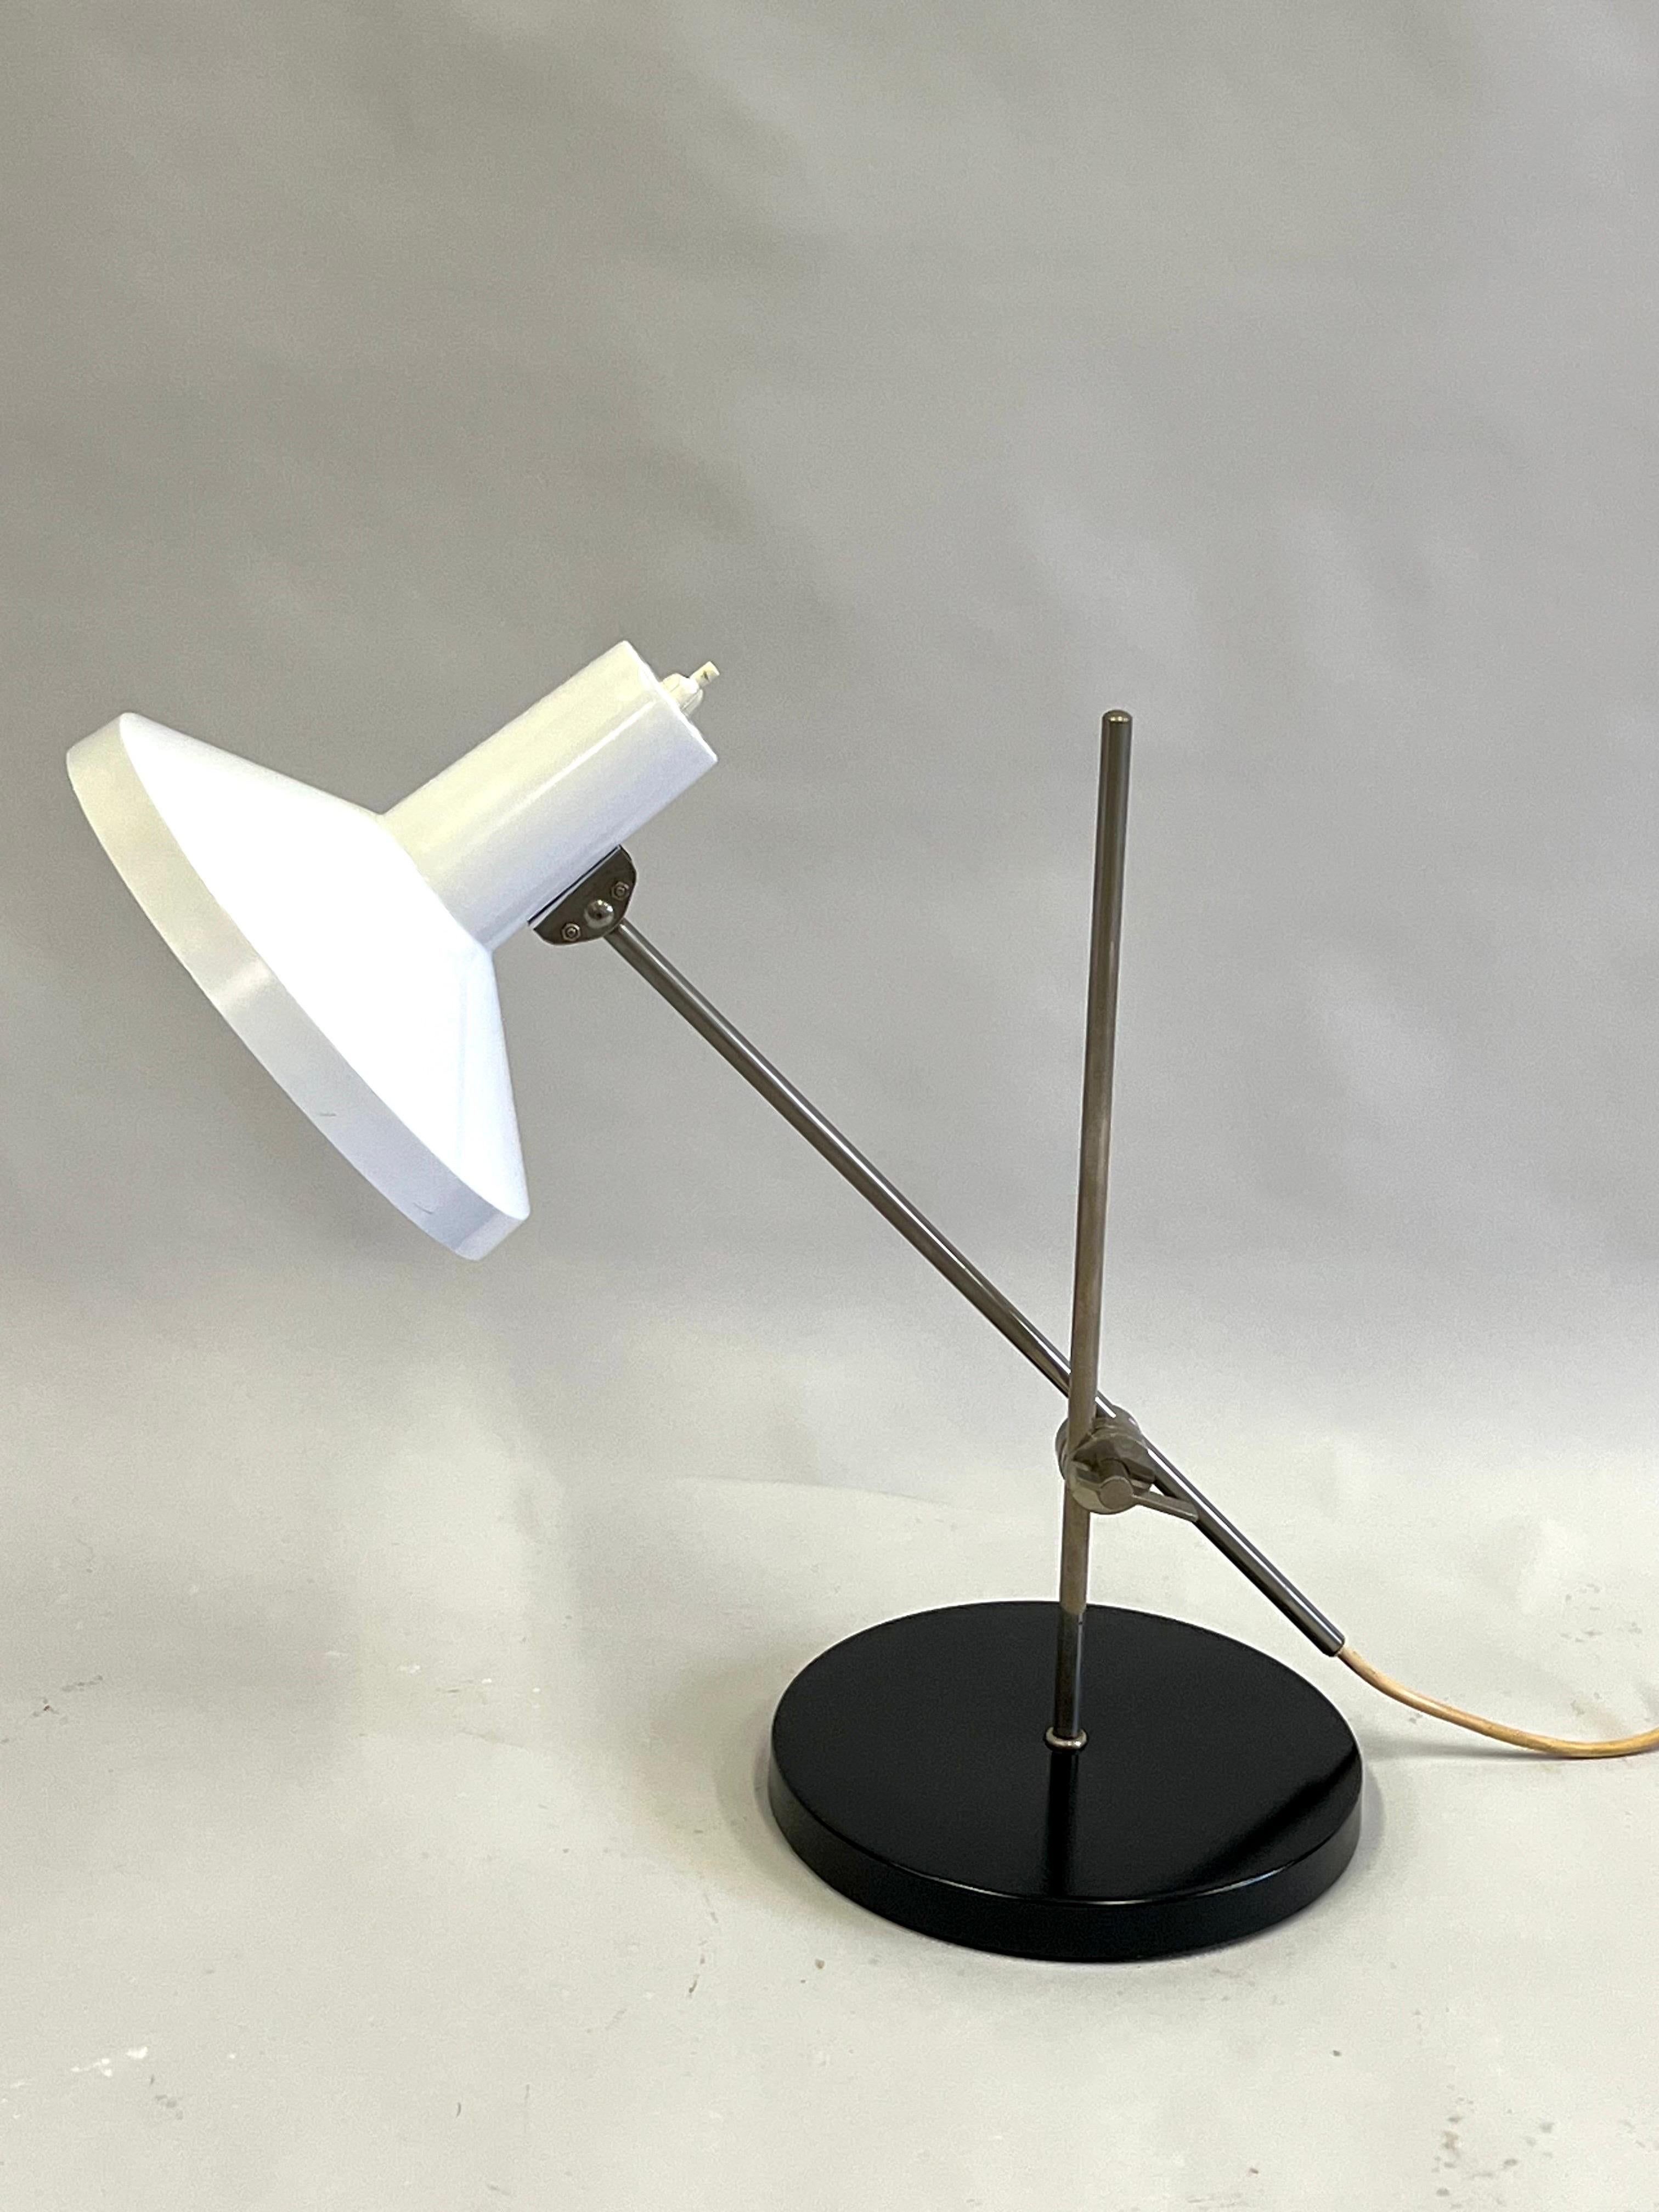 Italian Mid-Century Modern Cantilevered Table / Desk Lamp, Attr. to Arredoluce In Good Condition For Sale In New York, NY